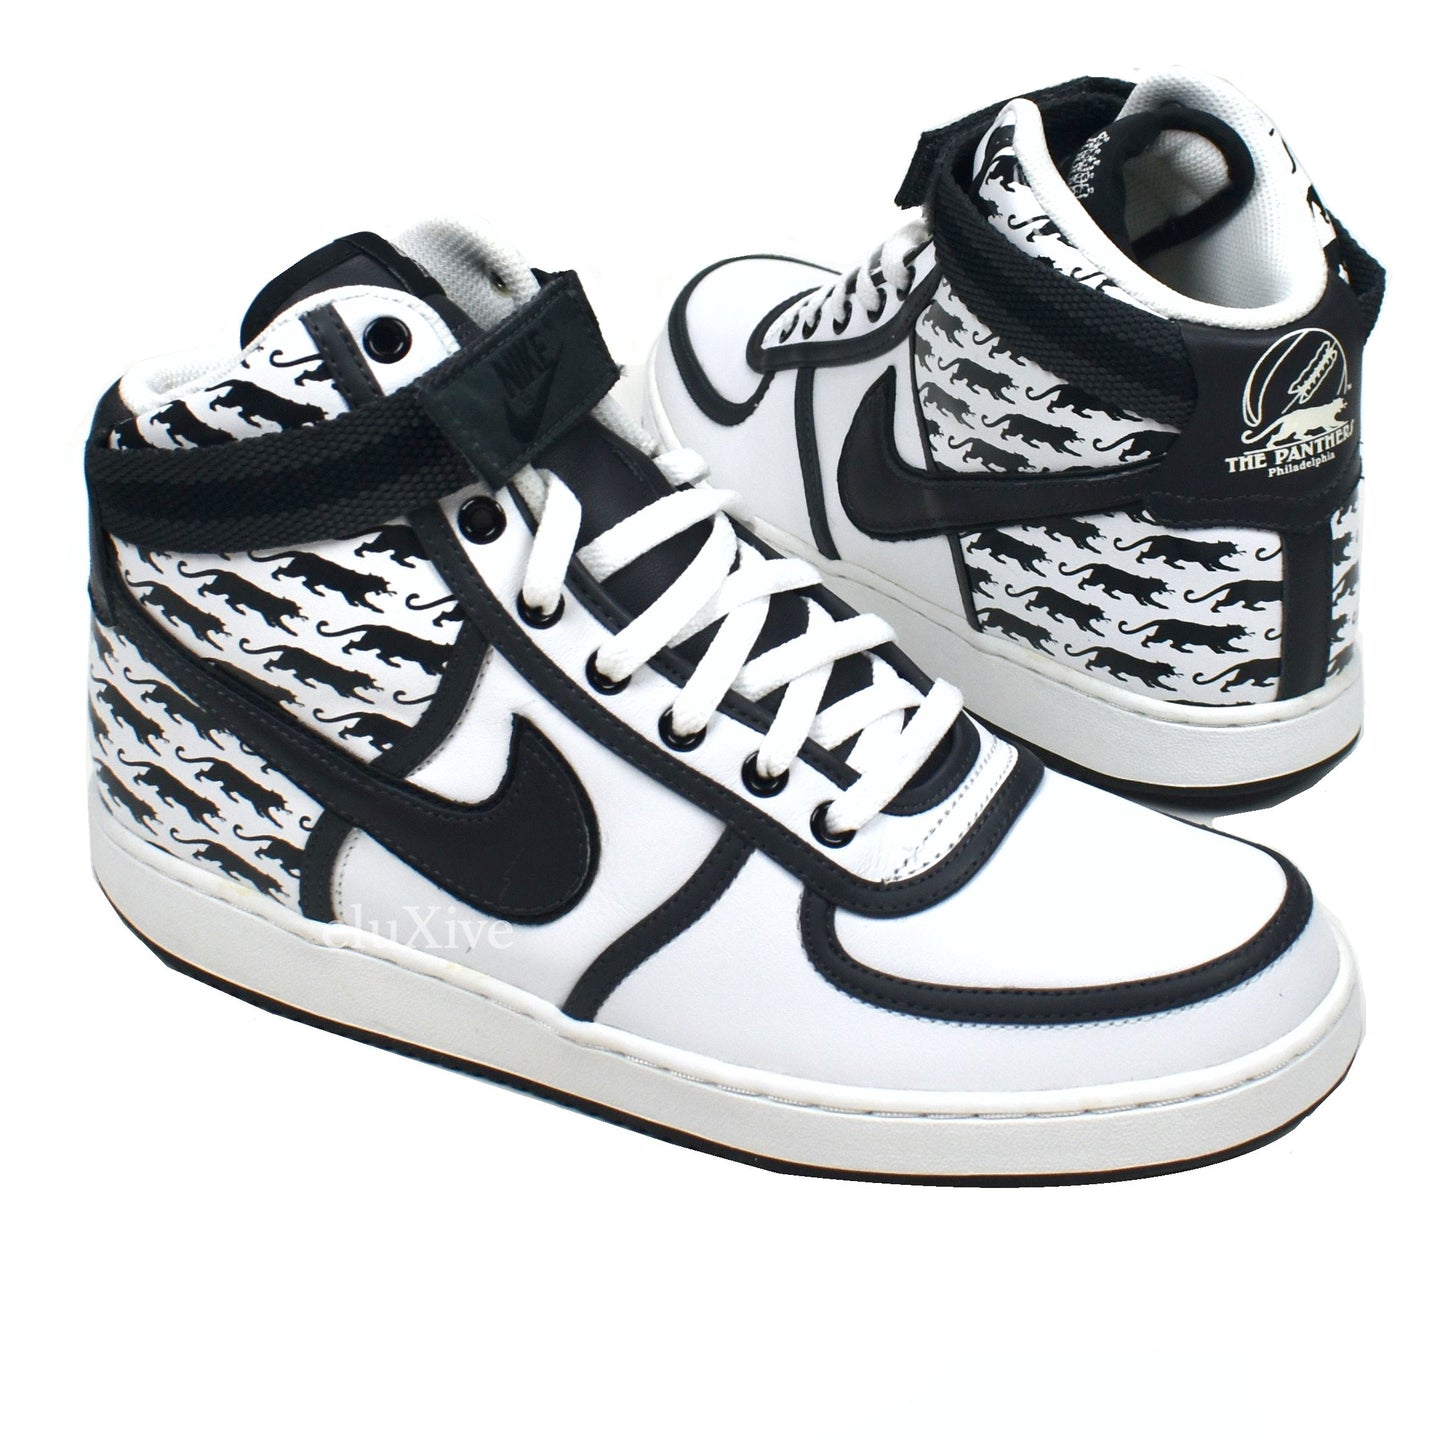 Nike - Vandal High BFIVE 'Philly Panthers' (White/Black)